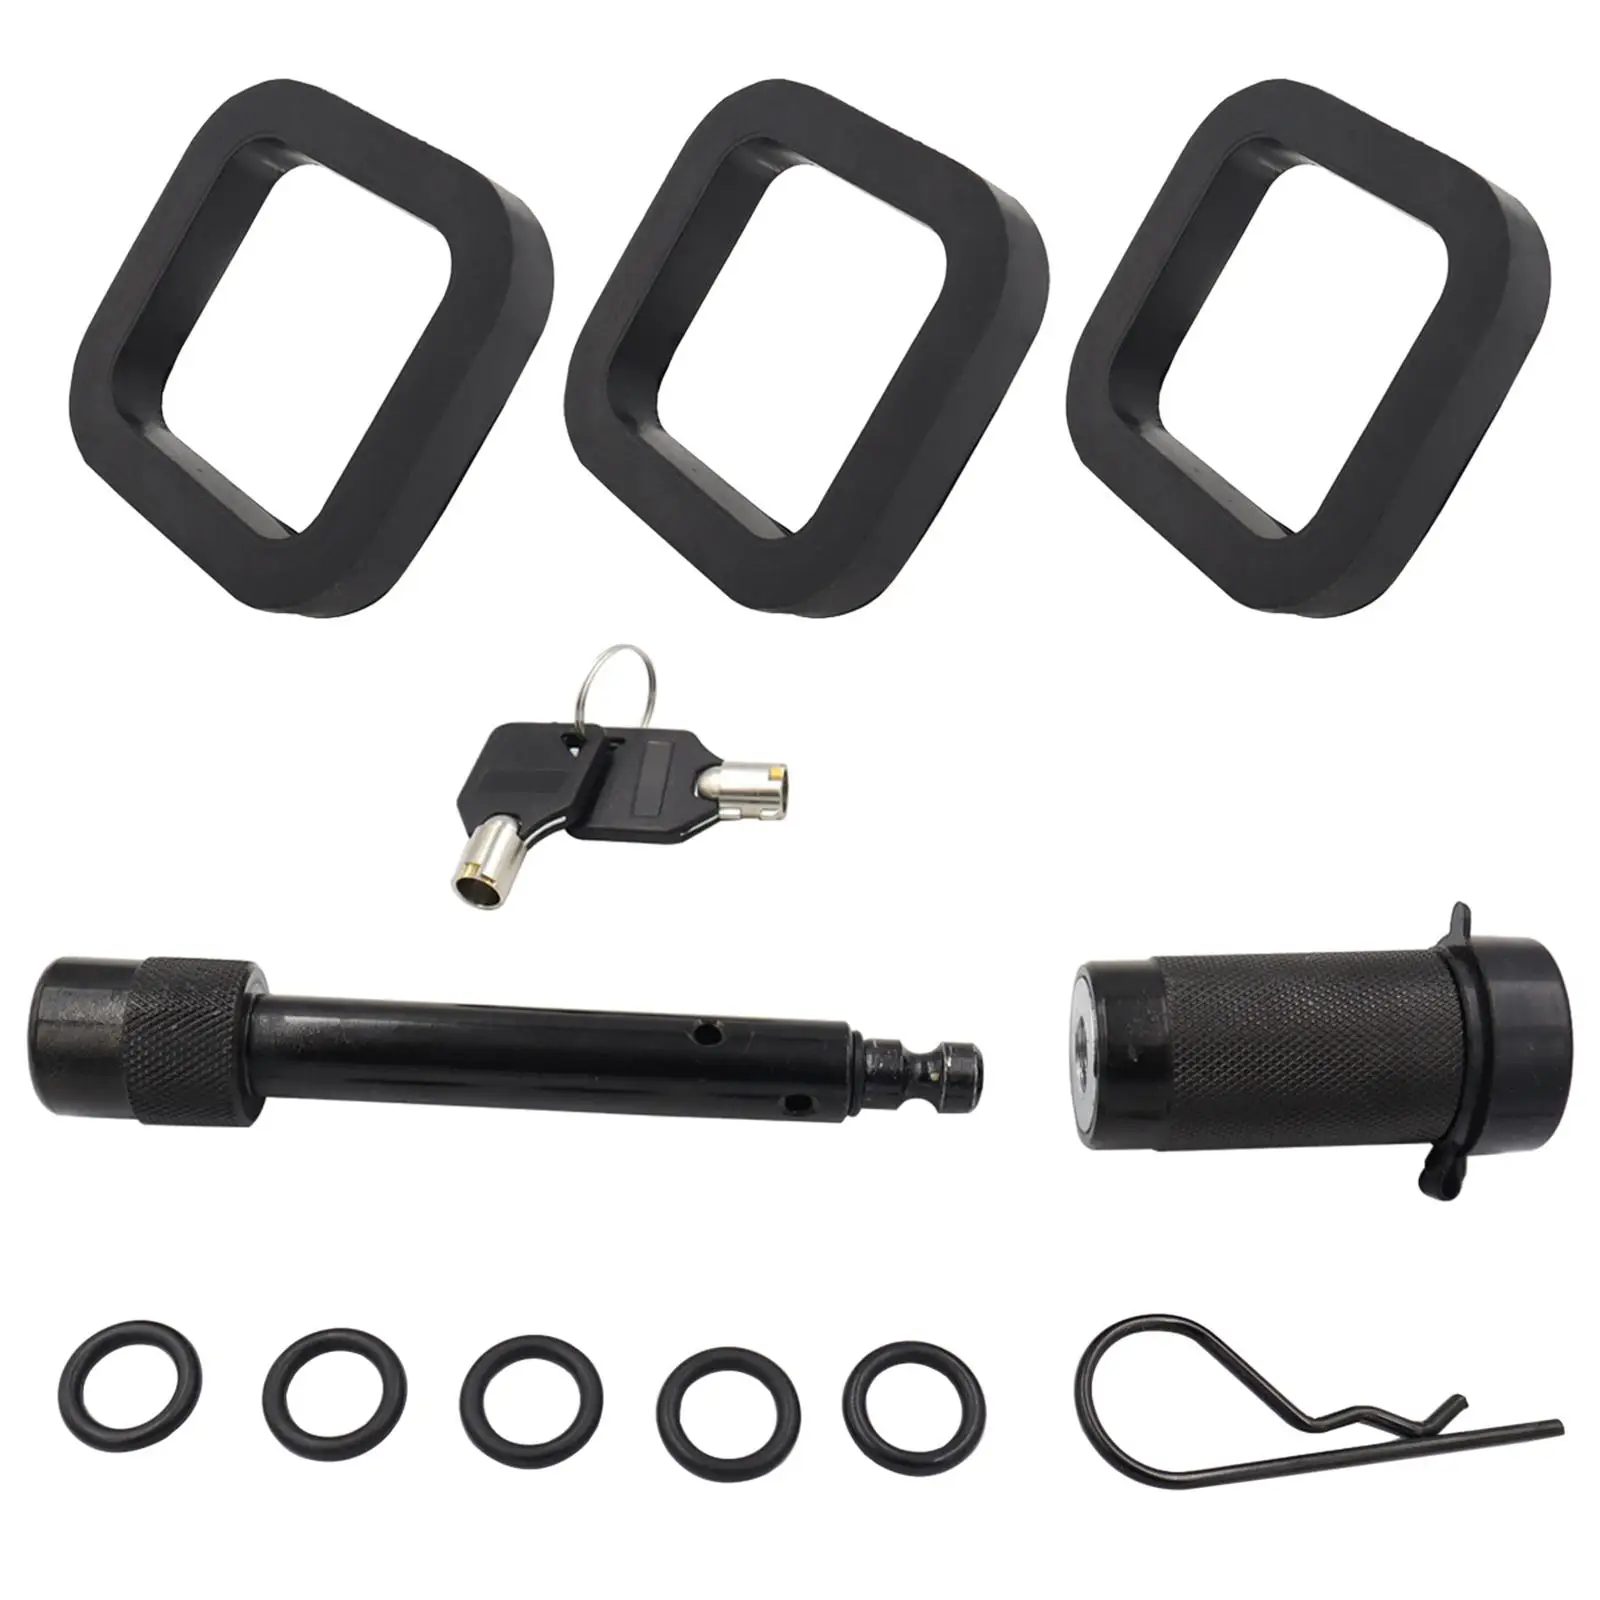 

5/8" Pin Trailer Hitch Receiver Lock Set Easily Install Universal with 5 Rubber